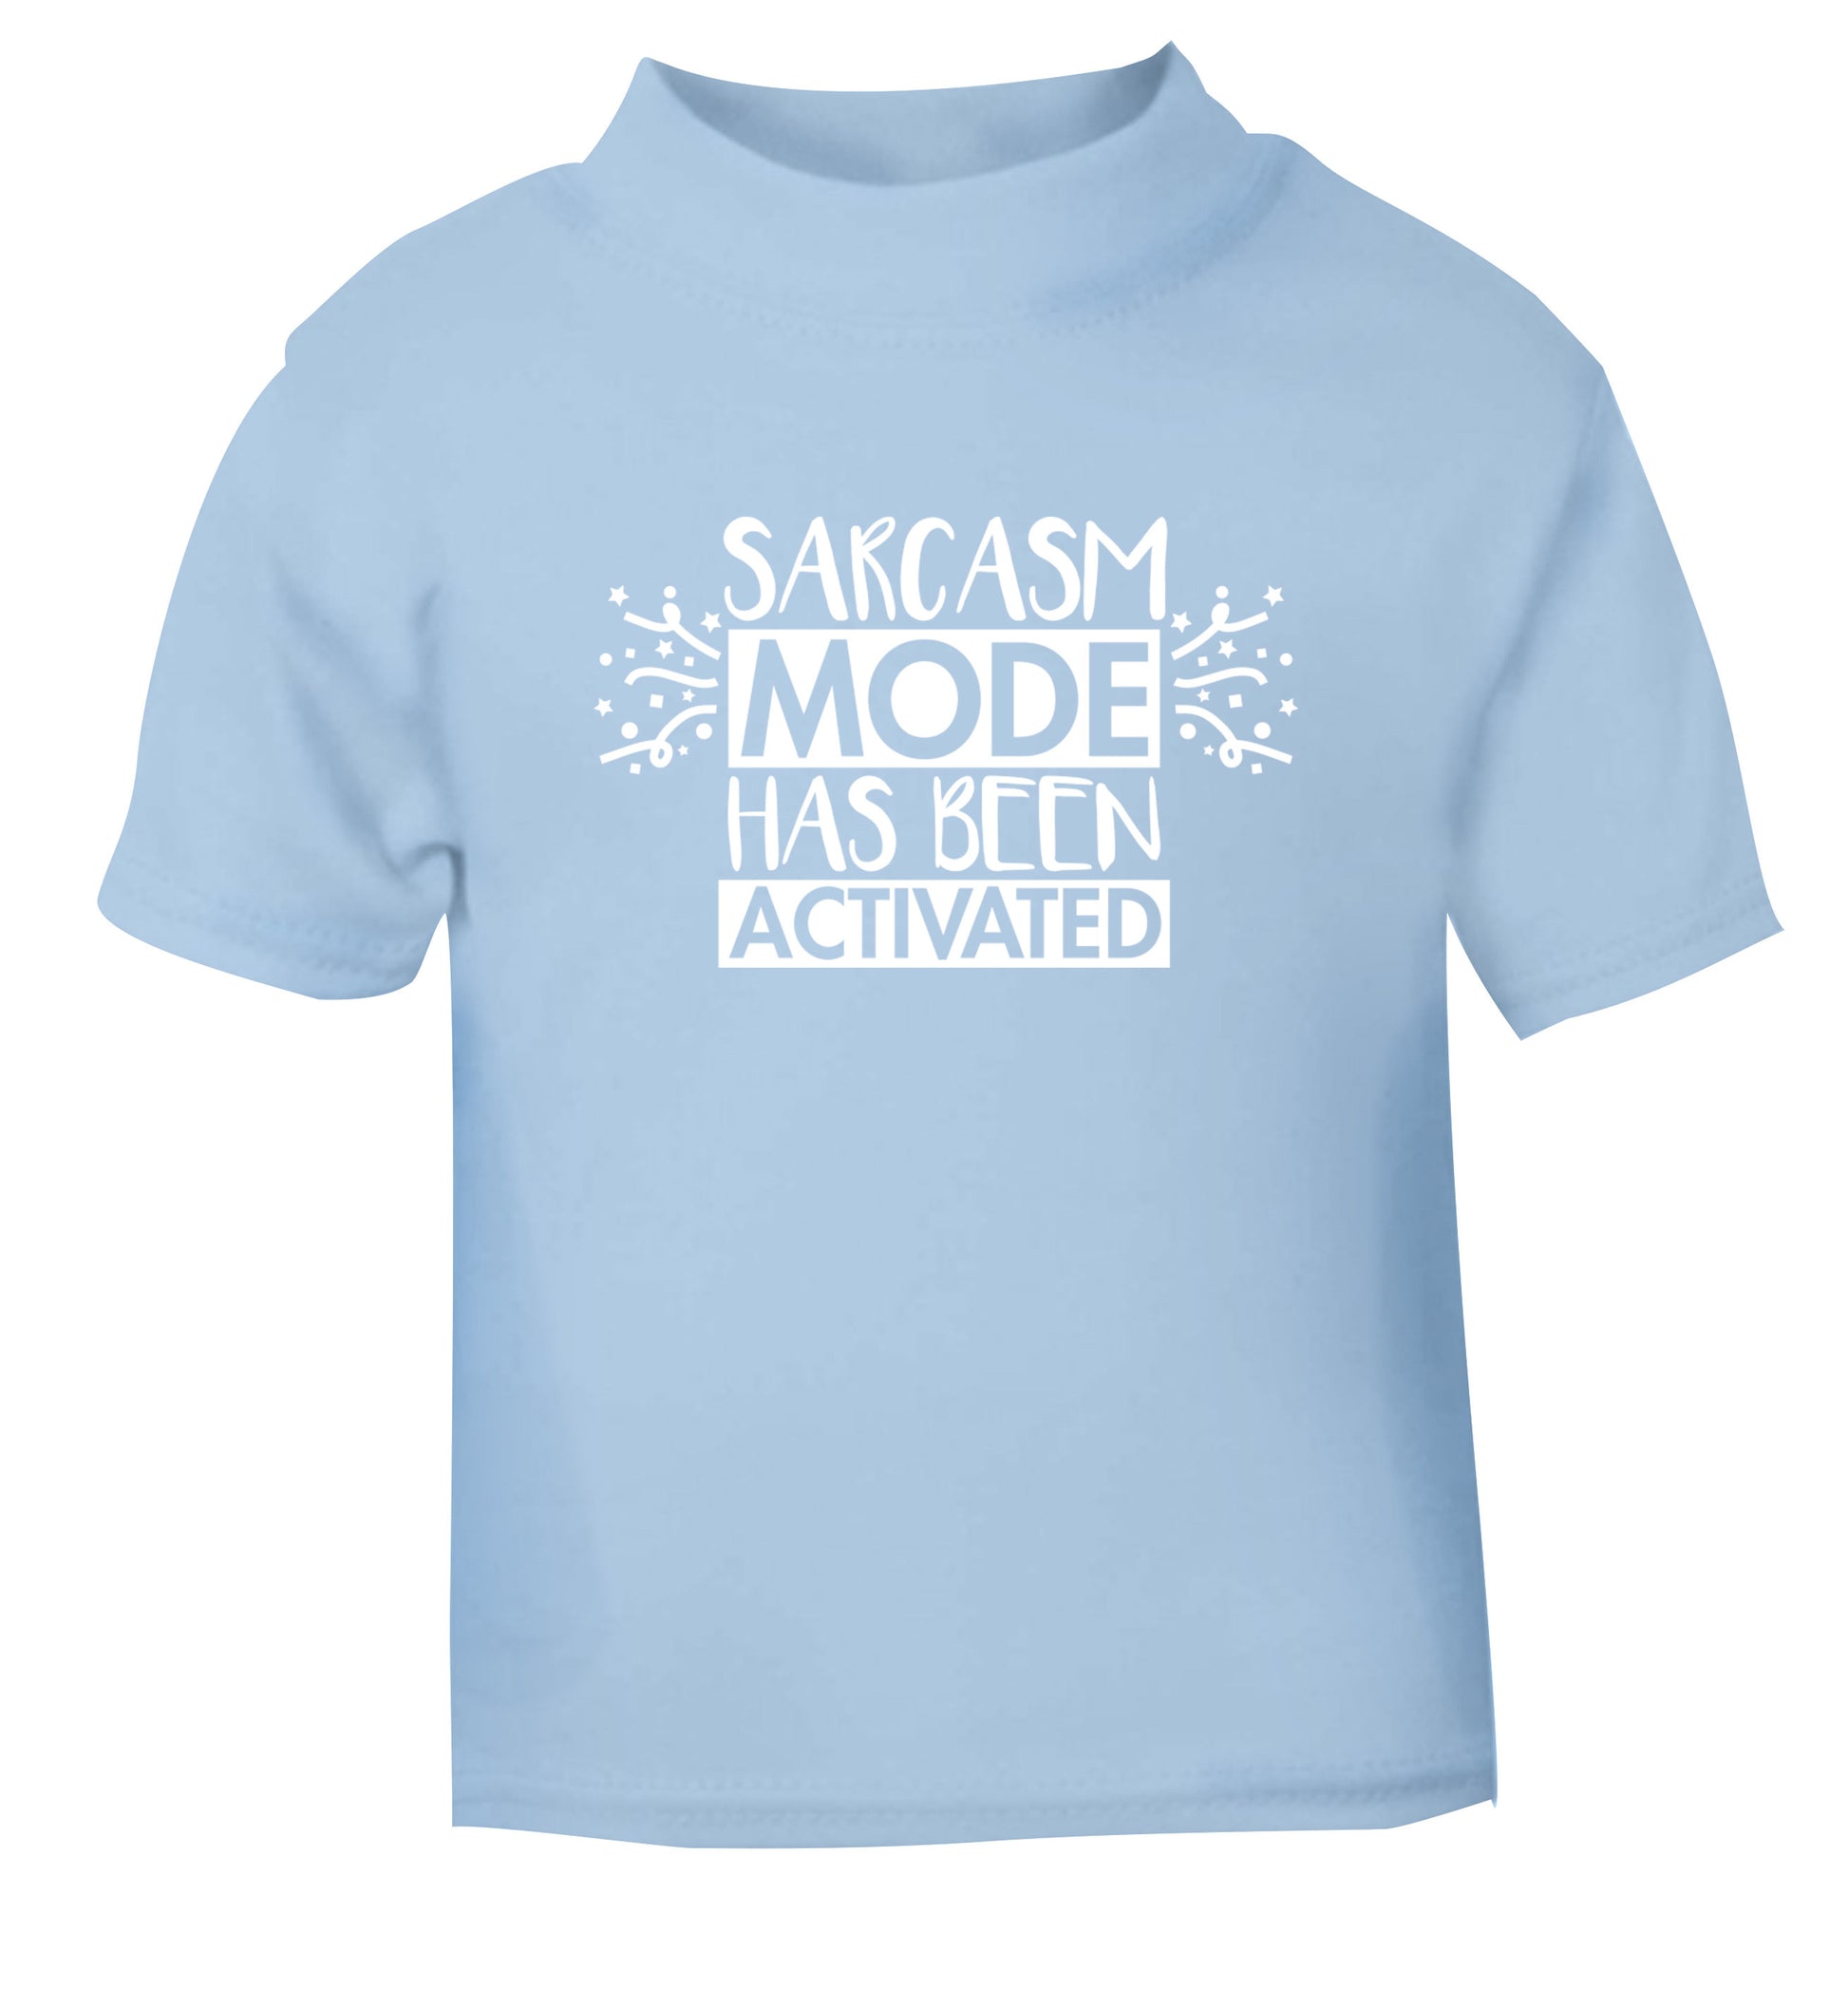 Sarcarsm mode has been activated light blue Baby Toddler Tshirt 2 Years